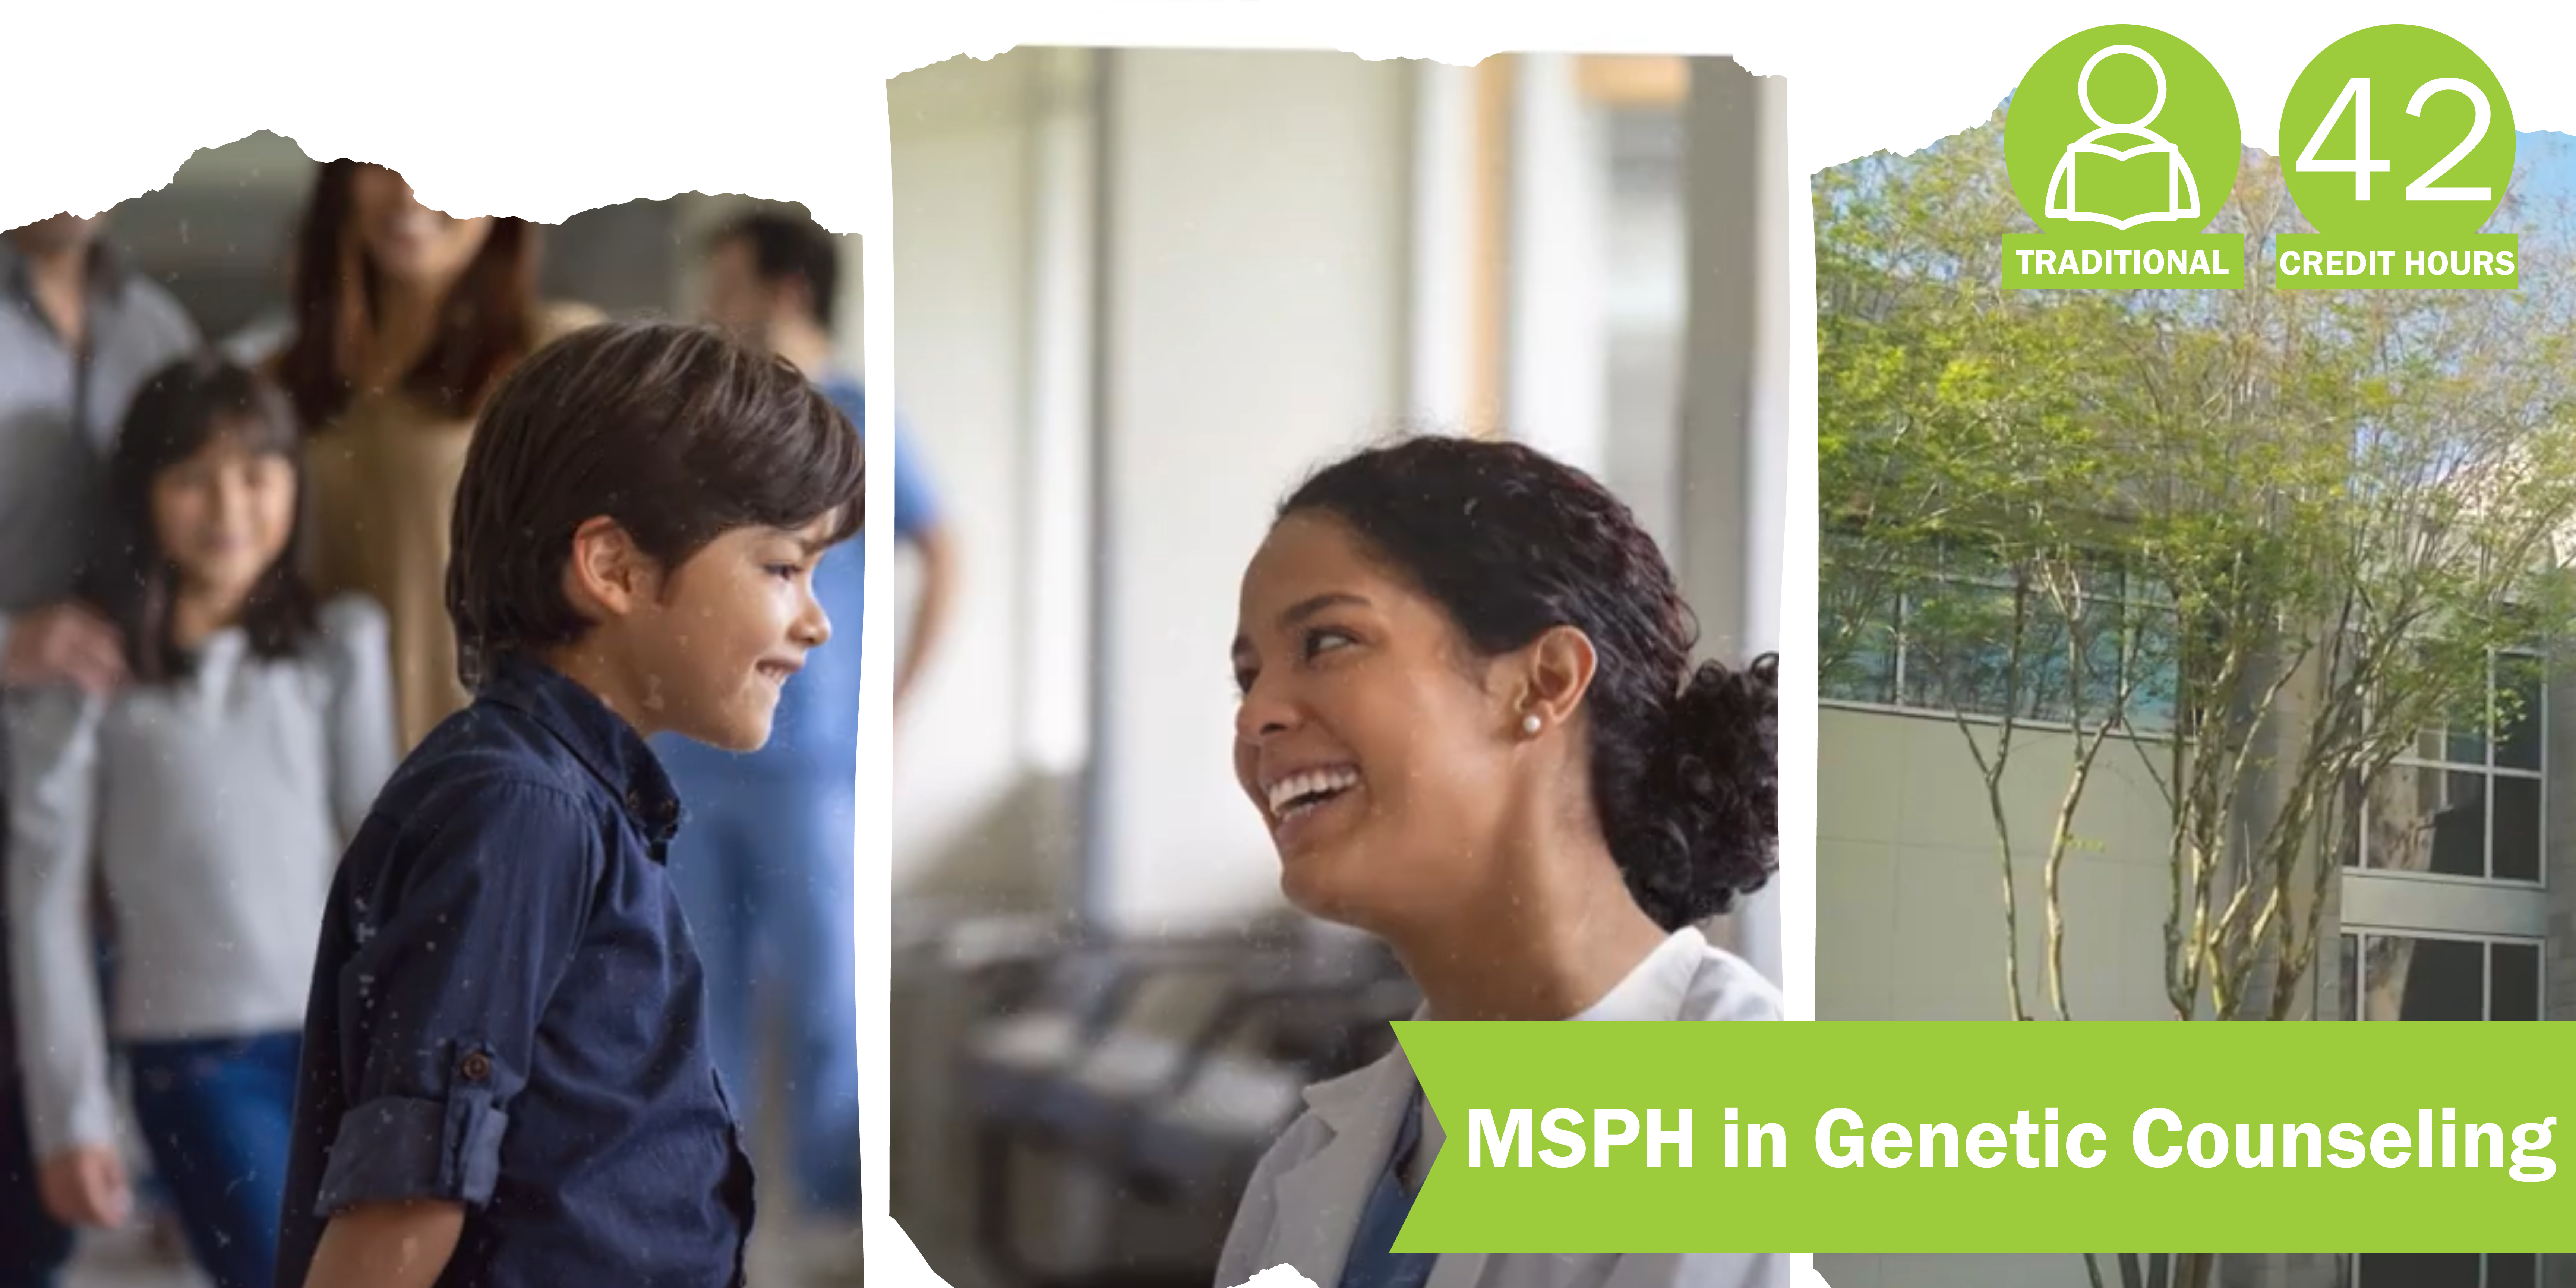 MSPH in Genetic Counseling at USF's College of Public Health